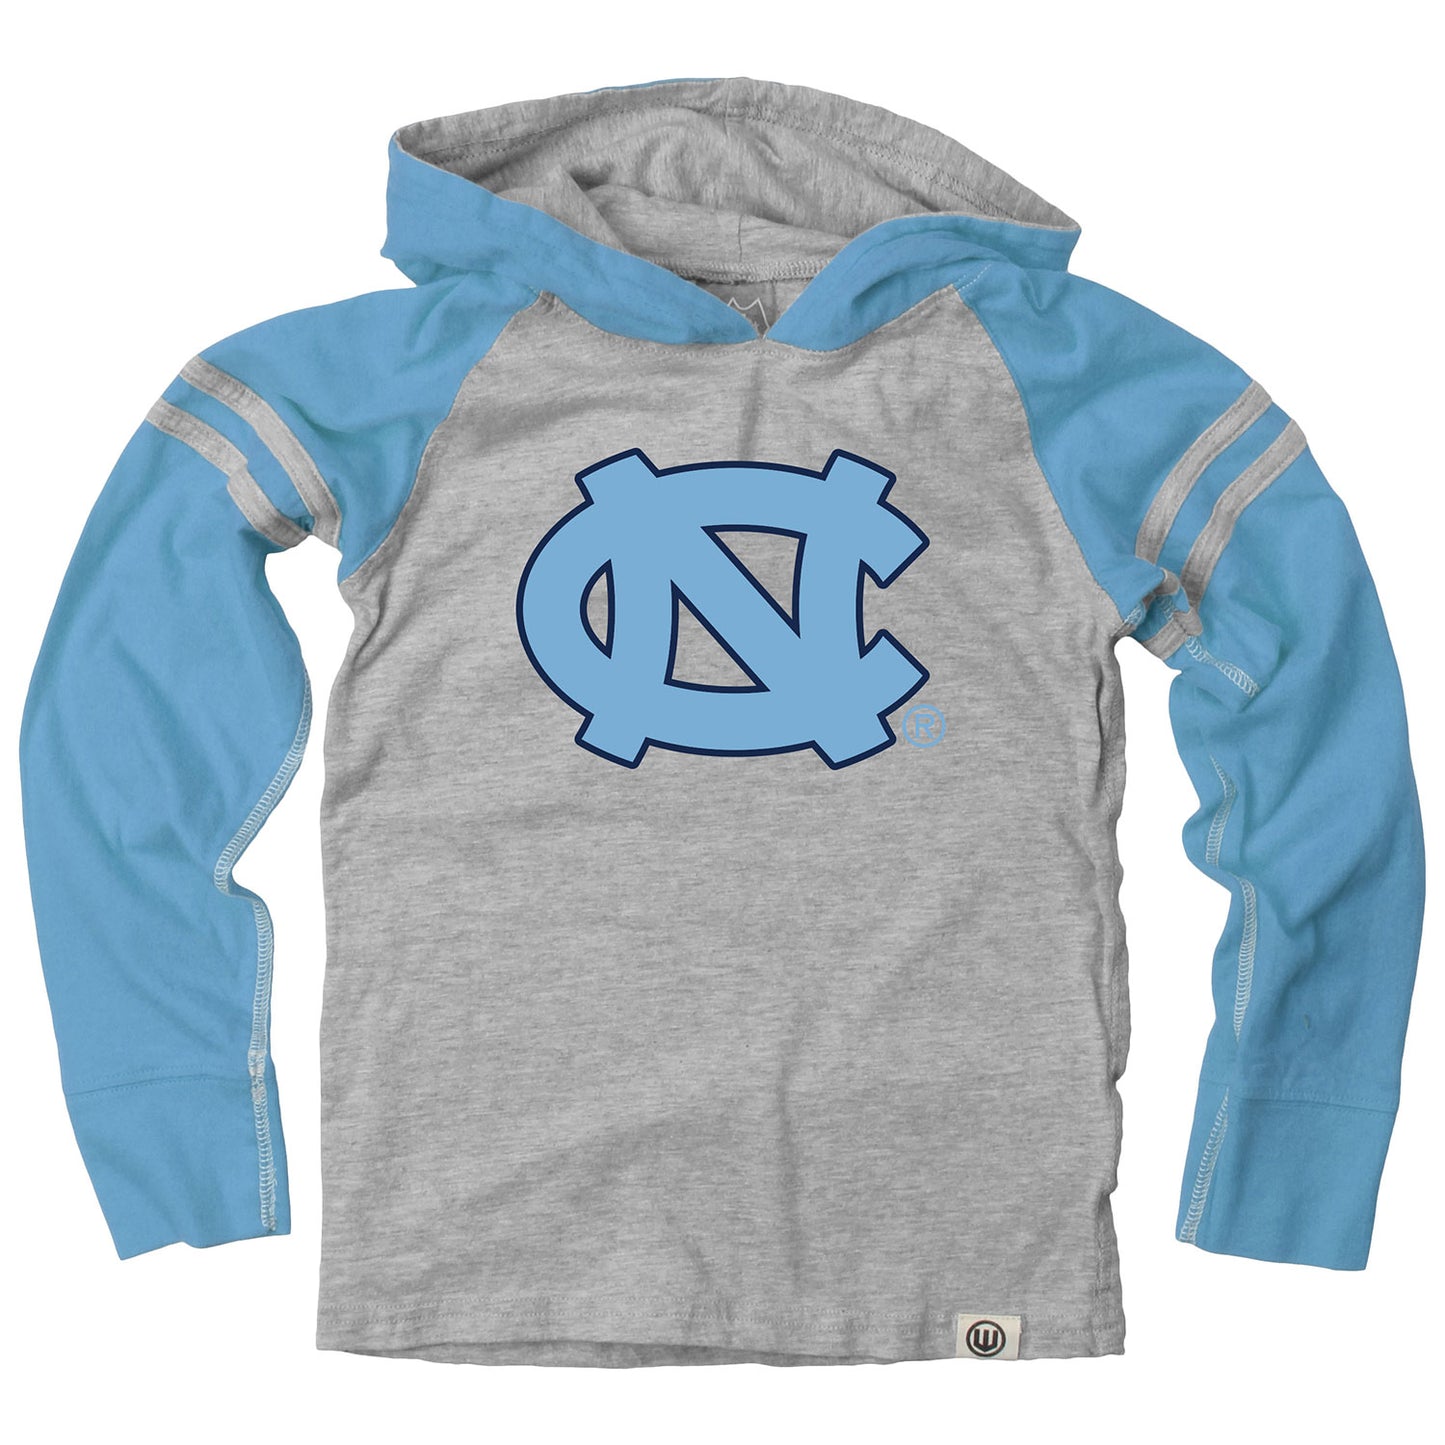 North Carolina Tar Heels Wes and Willy Youth Boys Long Sleeve Hooded T-Shirt Striped